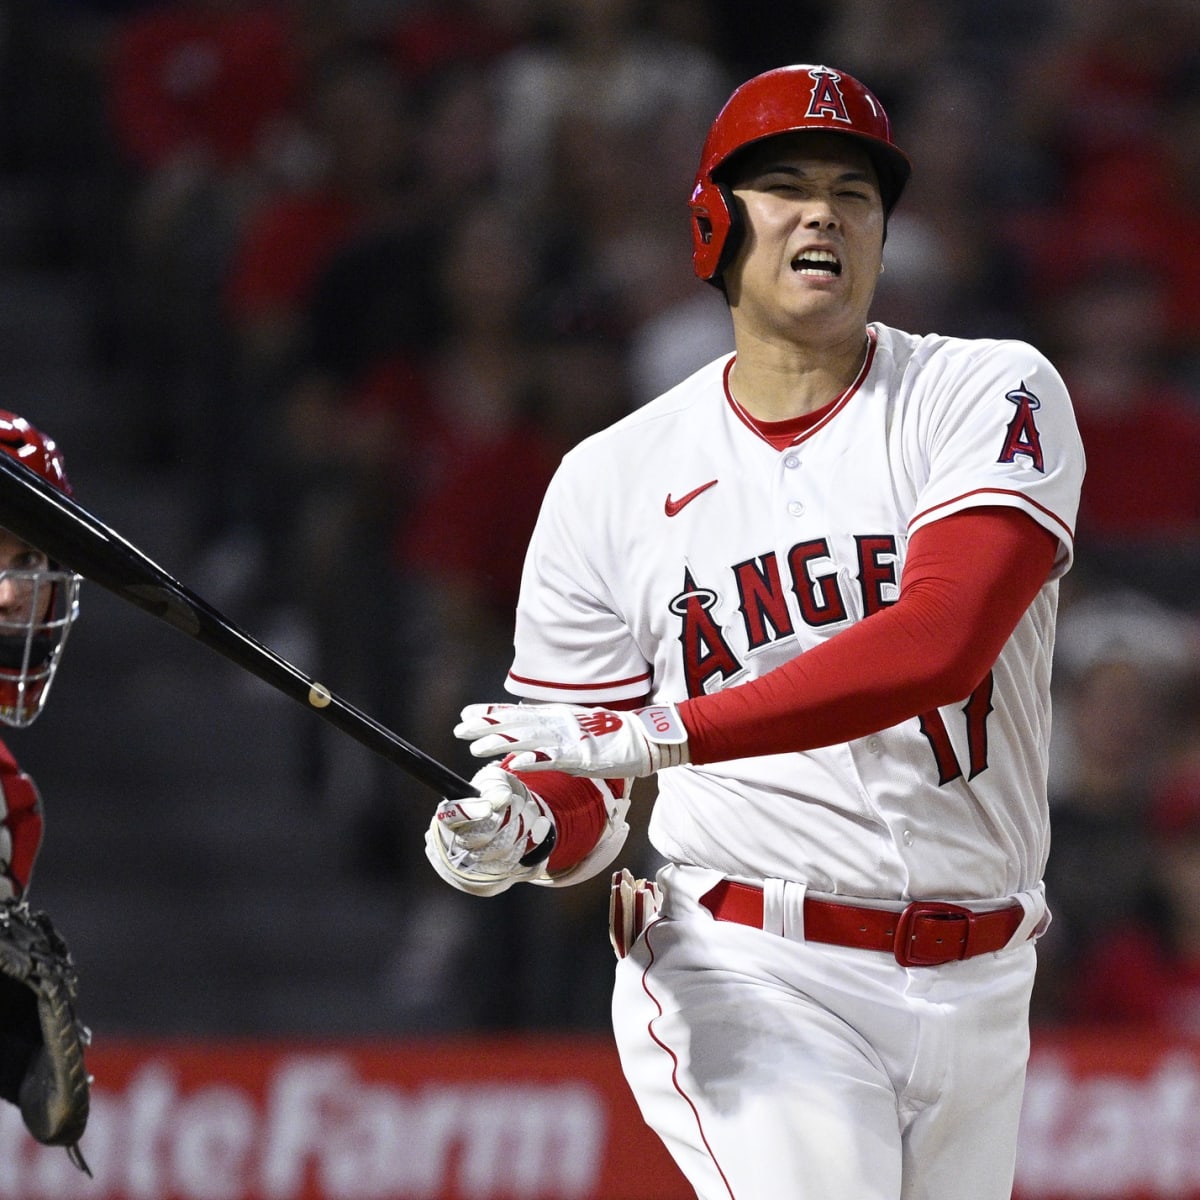 Shohei Ohtani elbow injury: Angels star tears UCL, won't pitch